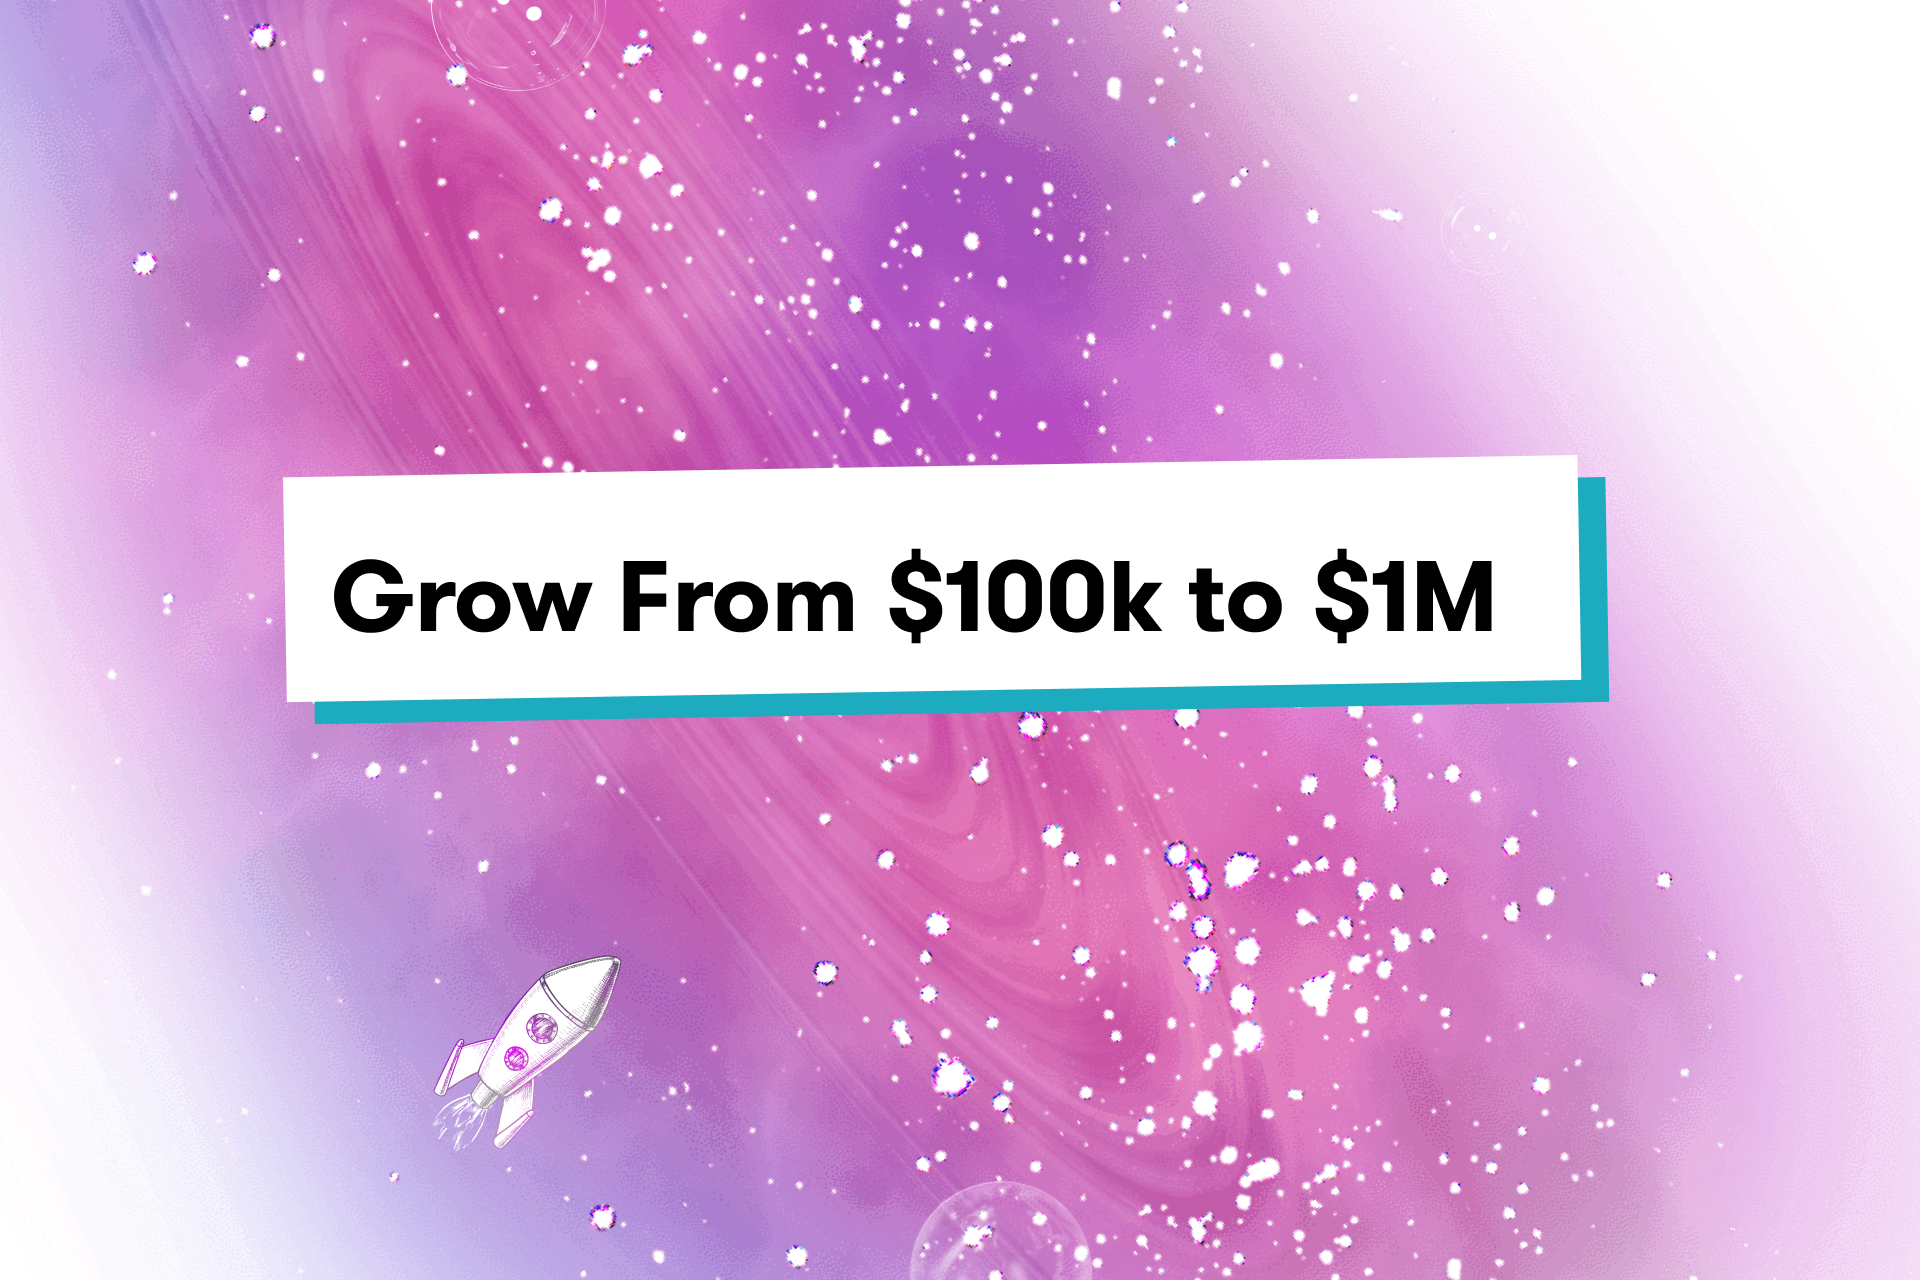 MasterClass Just Raised $100 Million To Produce More Celebrity